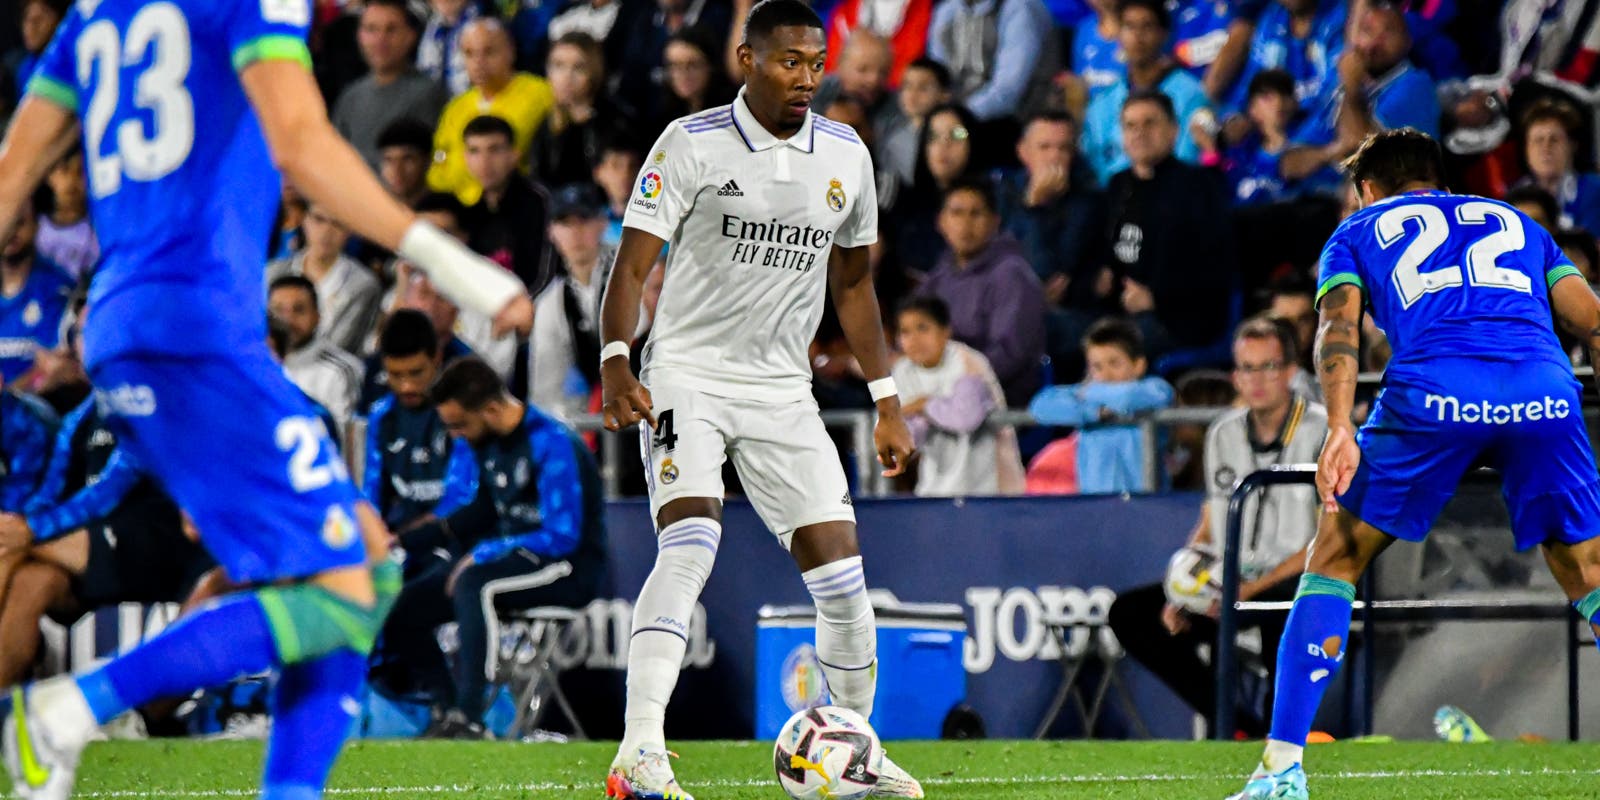 Alaba is driving Real Madrid forward with determination for the 2024 European Championship
	

